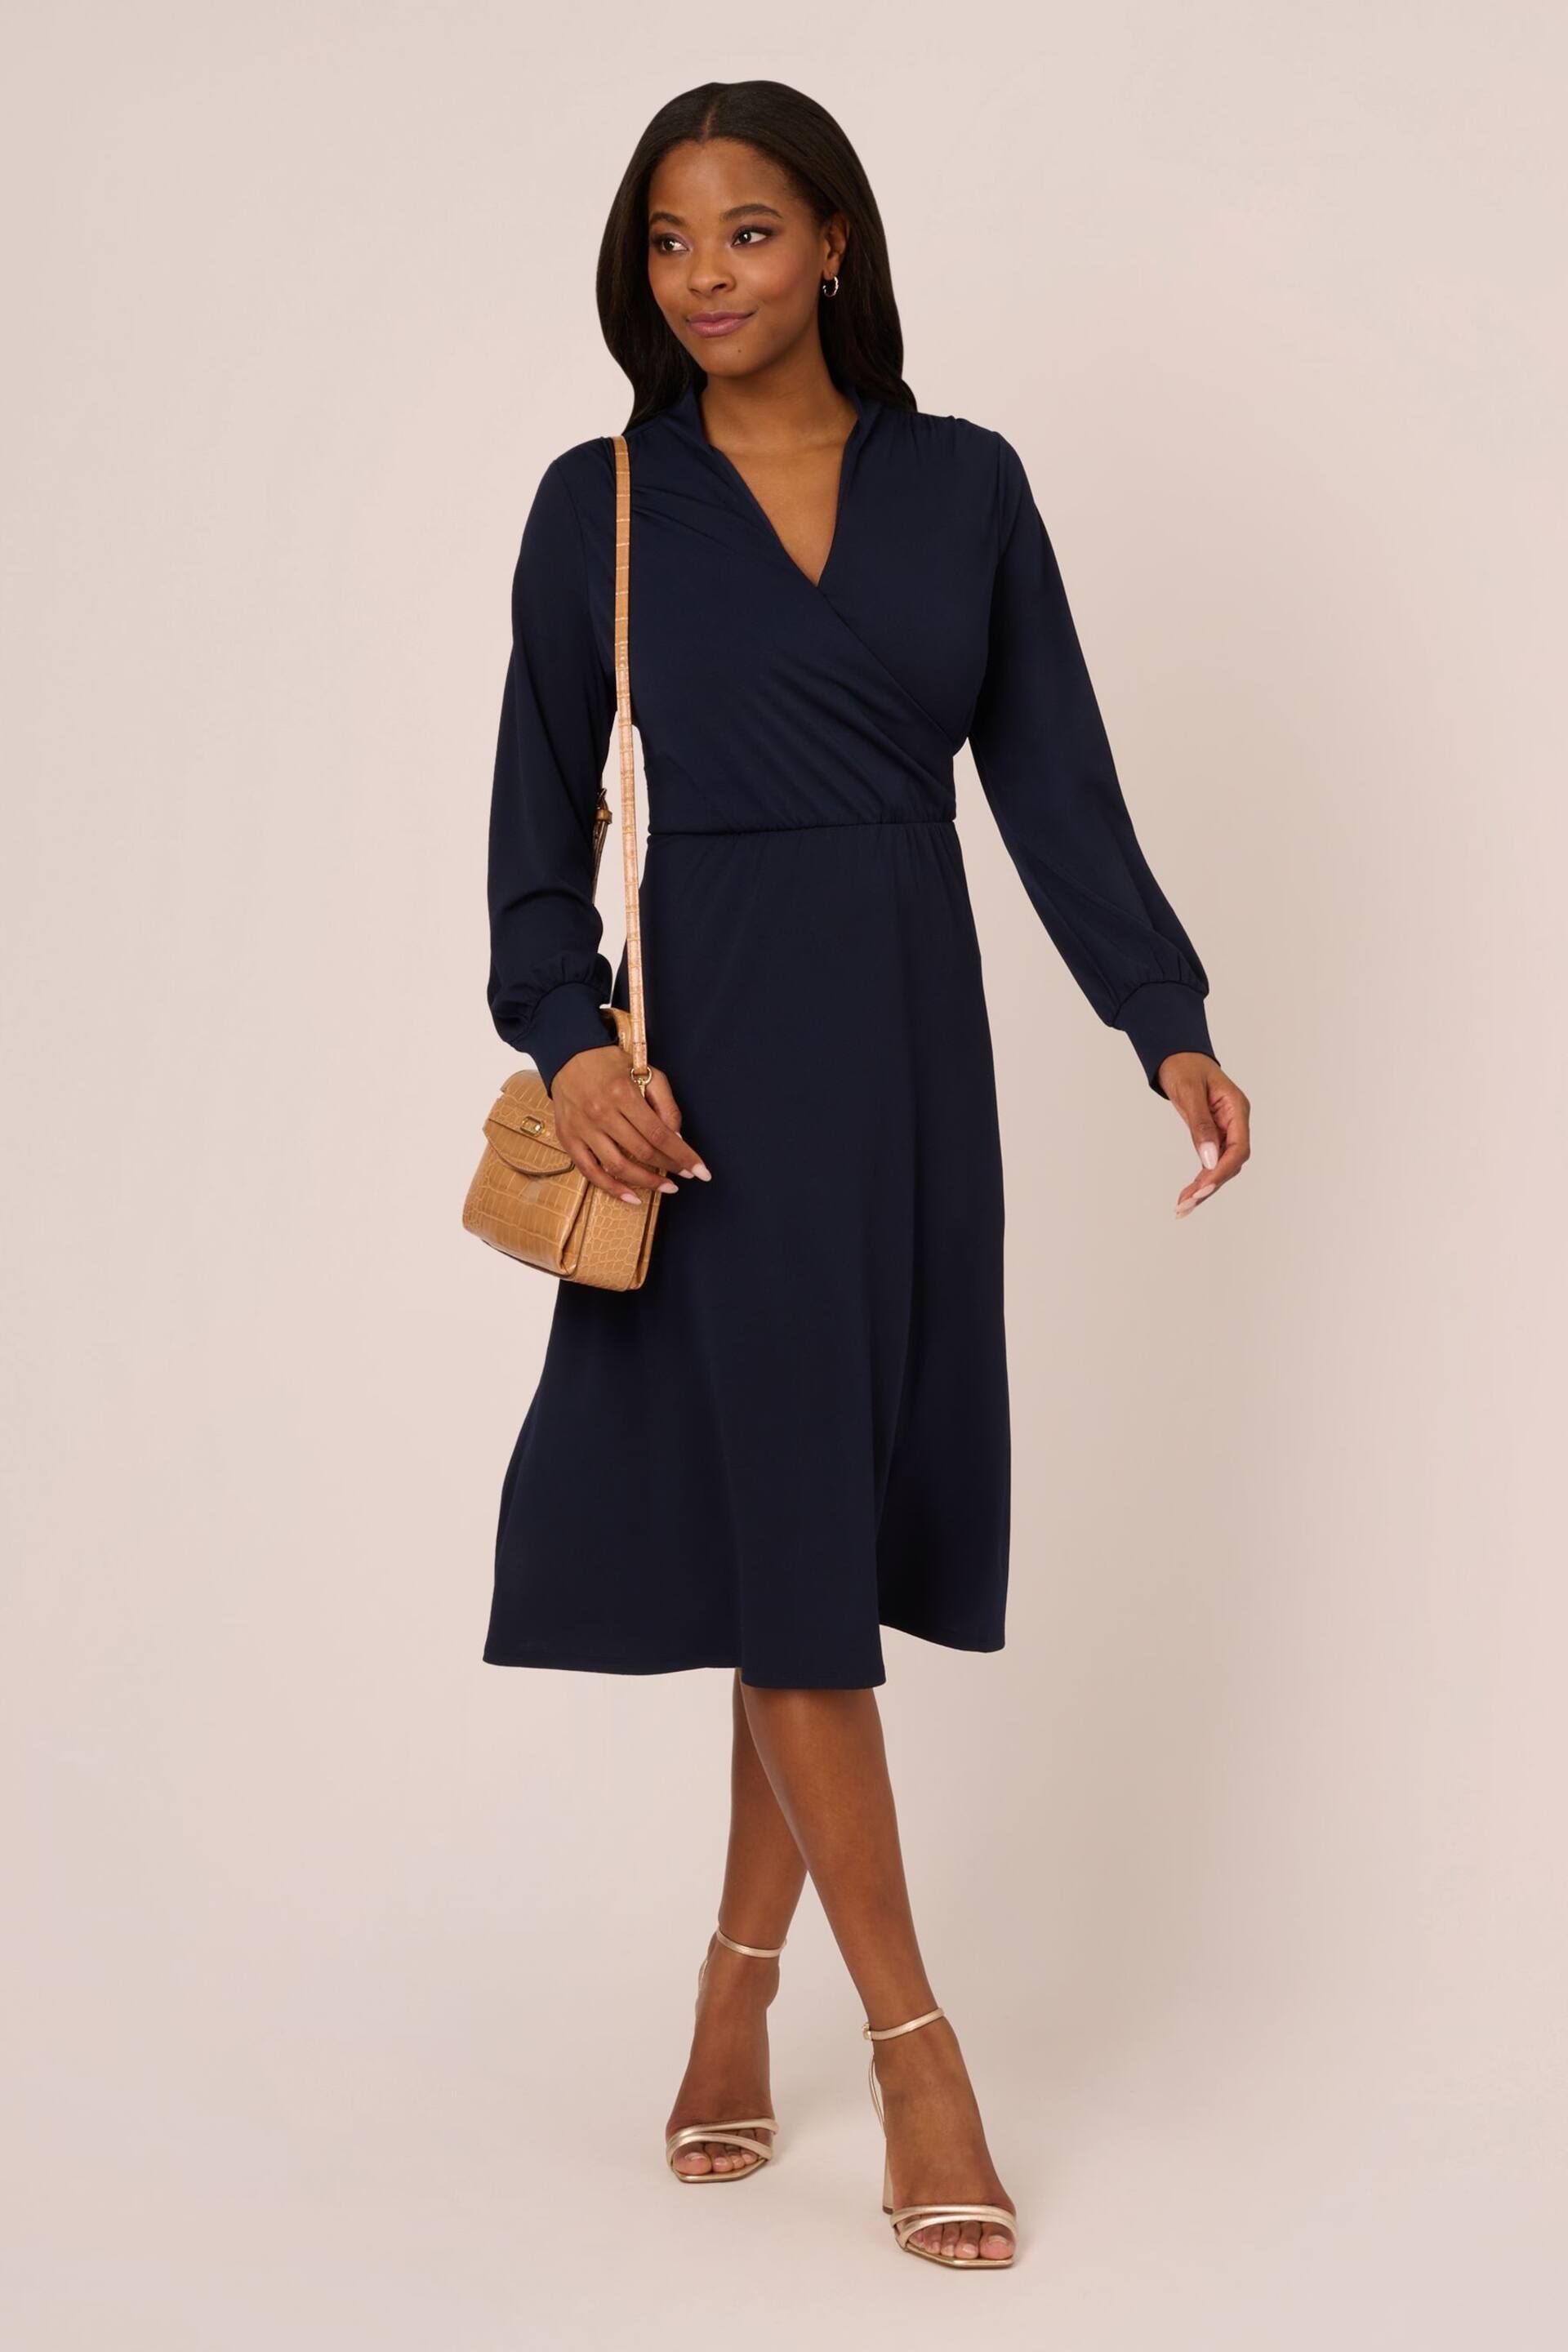 Adrianna Papell Blue Long Sleeve Wrap Dress - Image 3 of 7